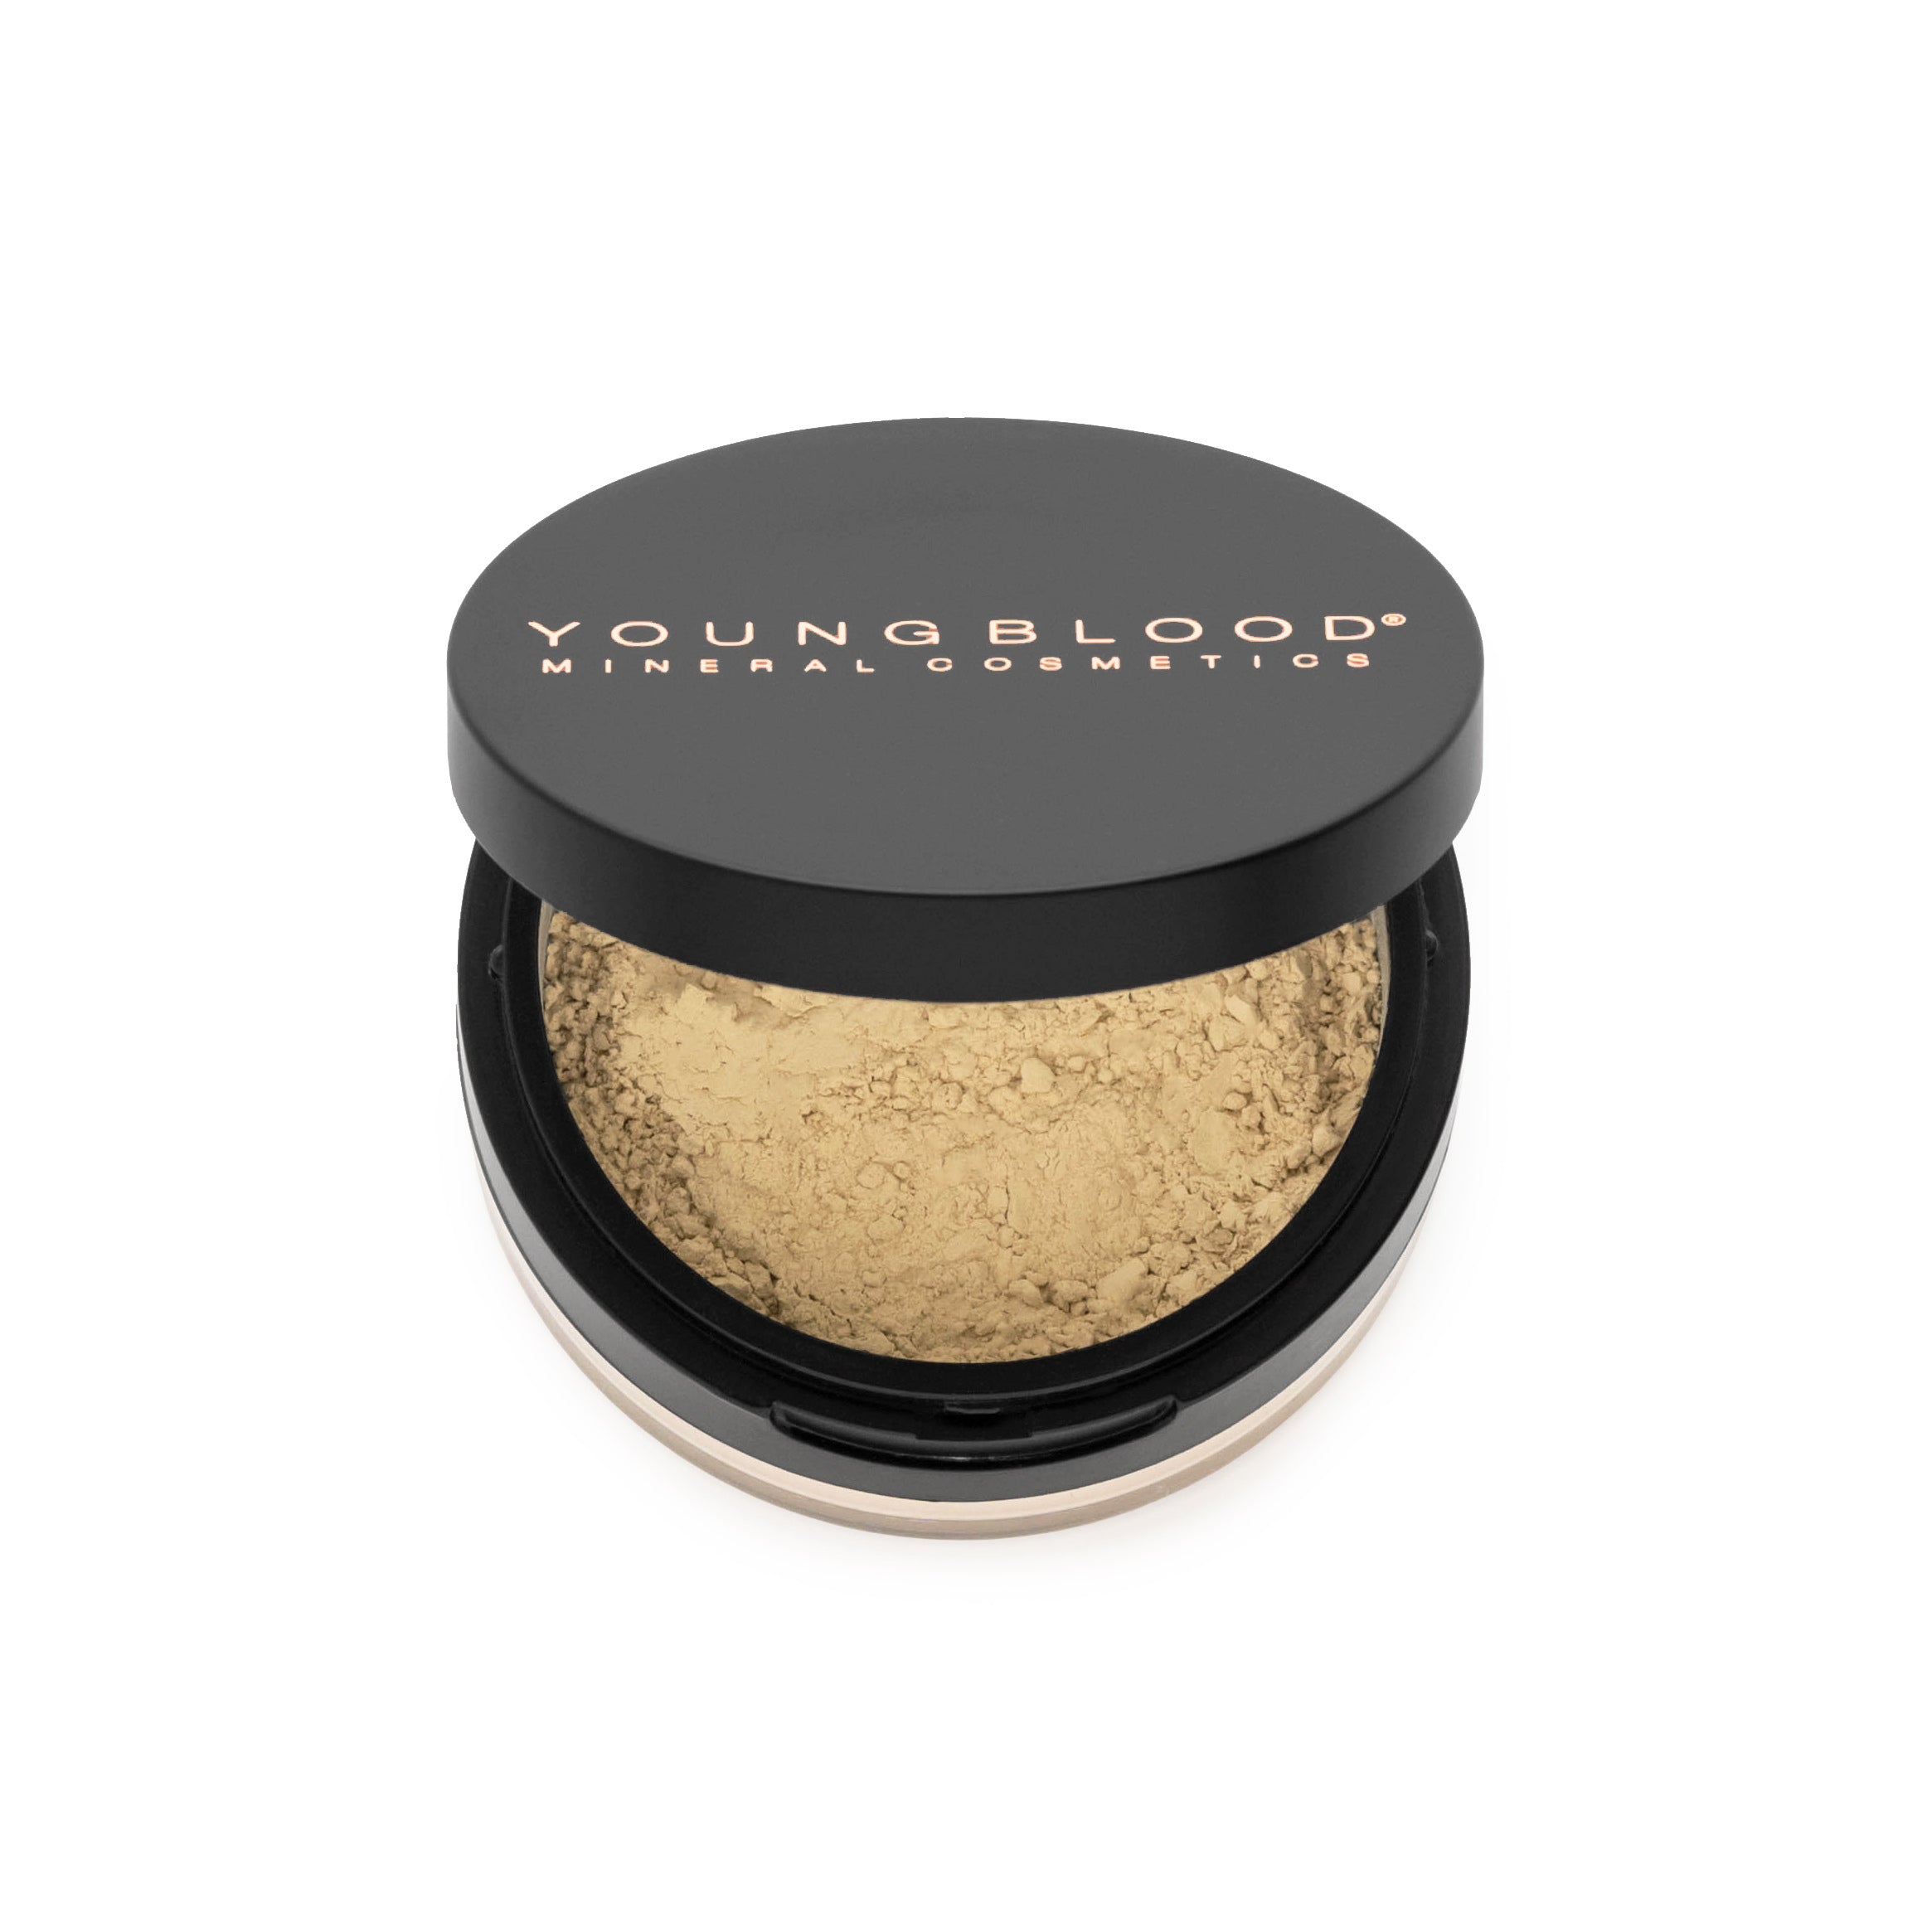 Youngblood Loose Mineral Rice Setting Powder, Light